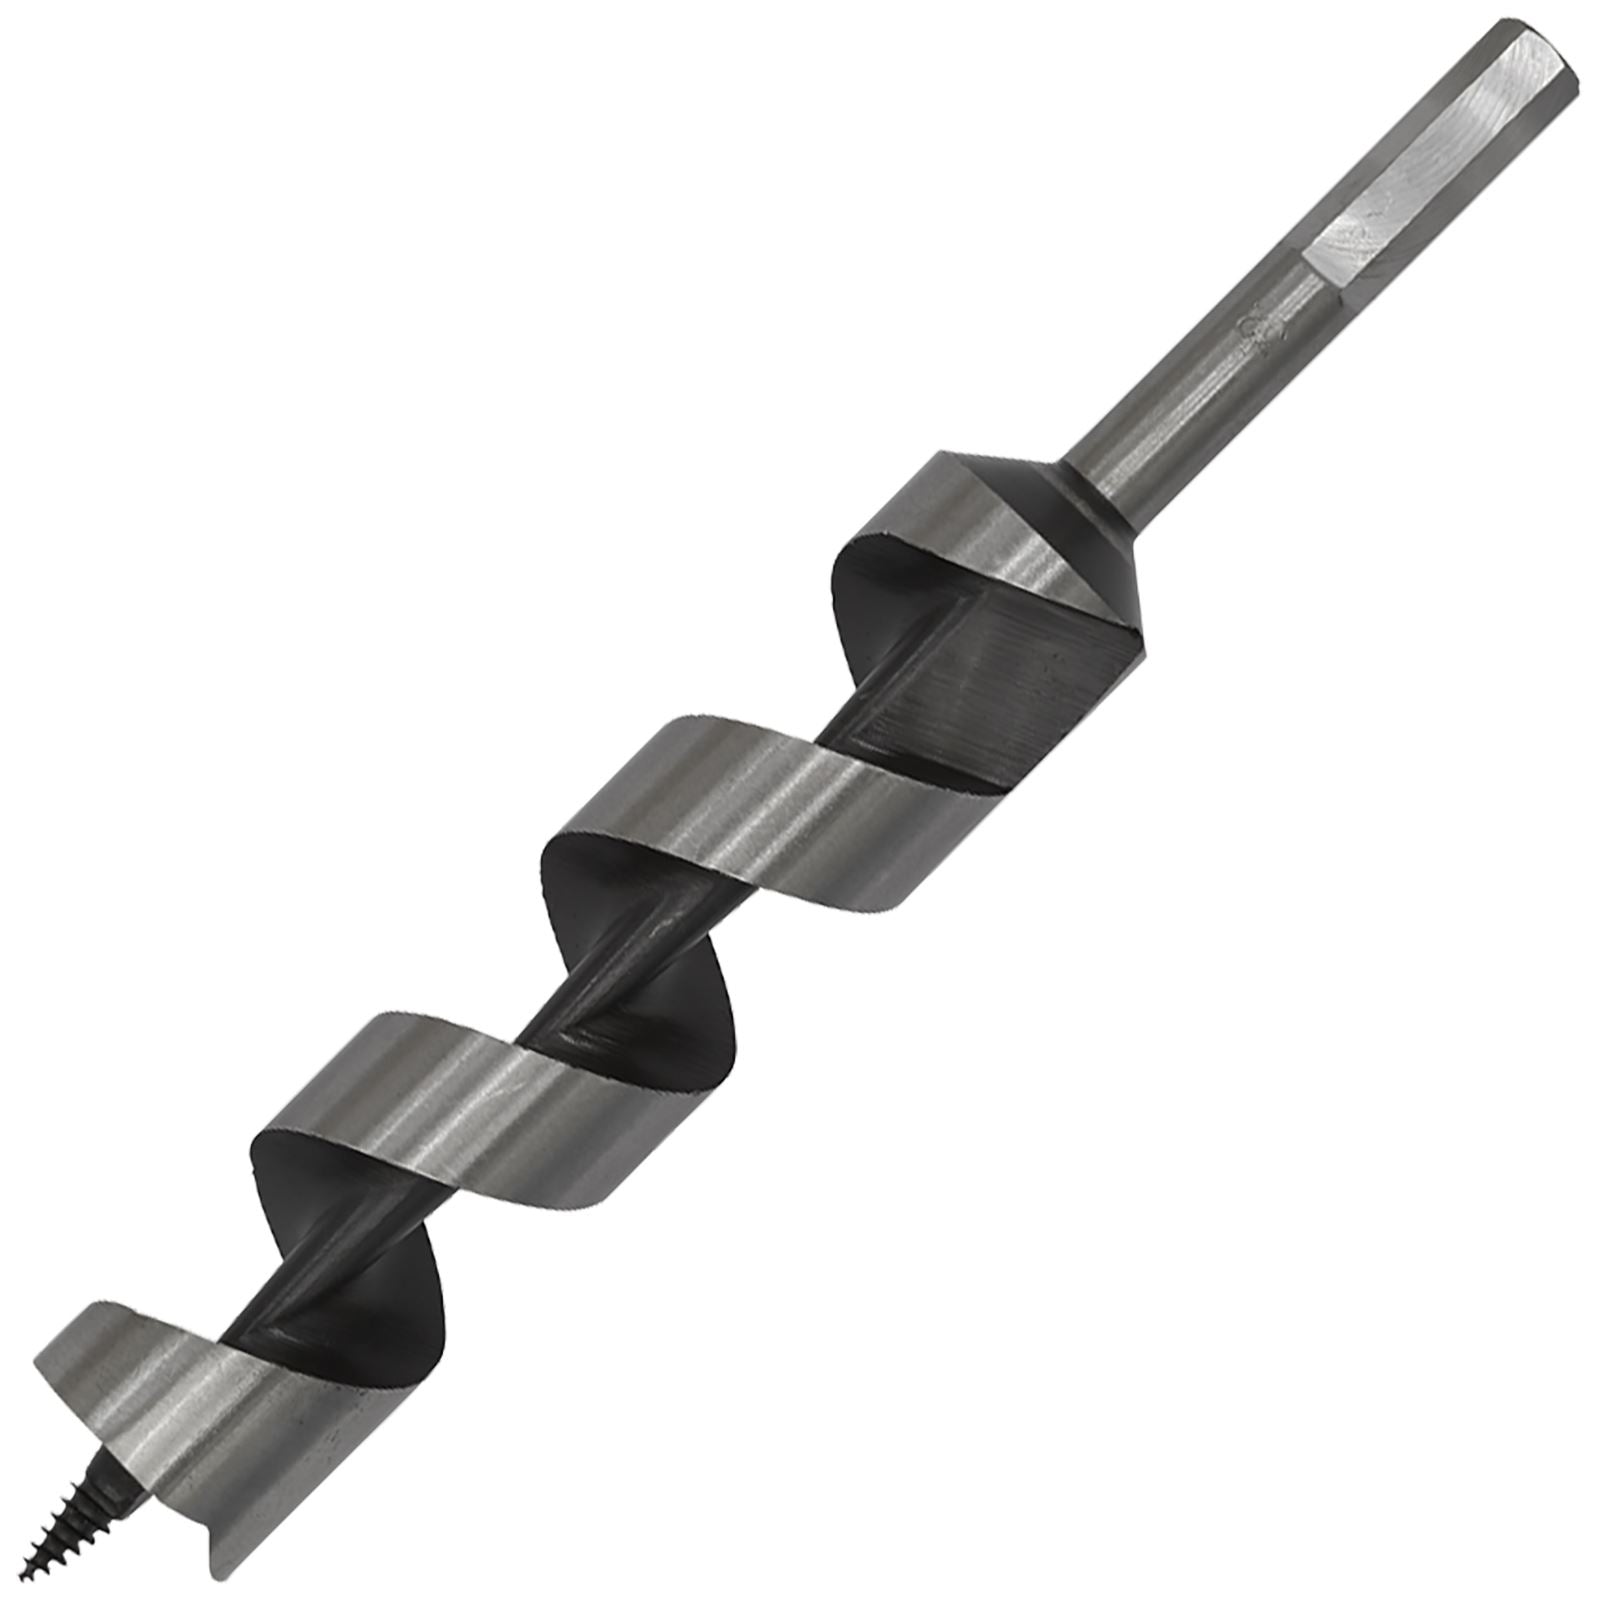 Worksafe by Sealey Auger Wood Drill Bit 32mm x 235mm